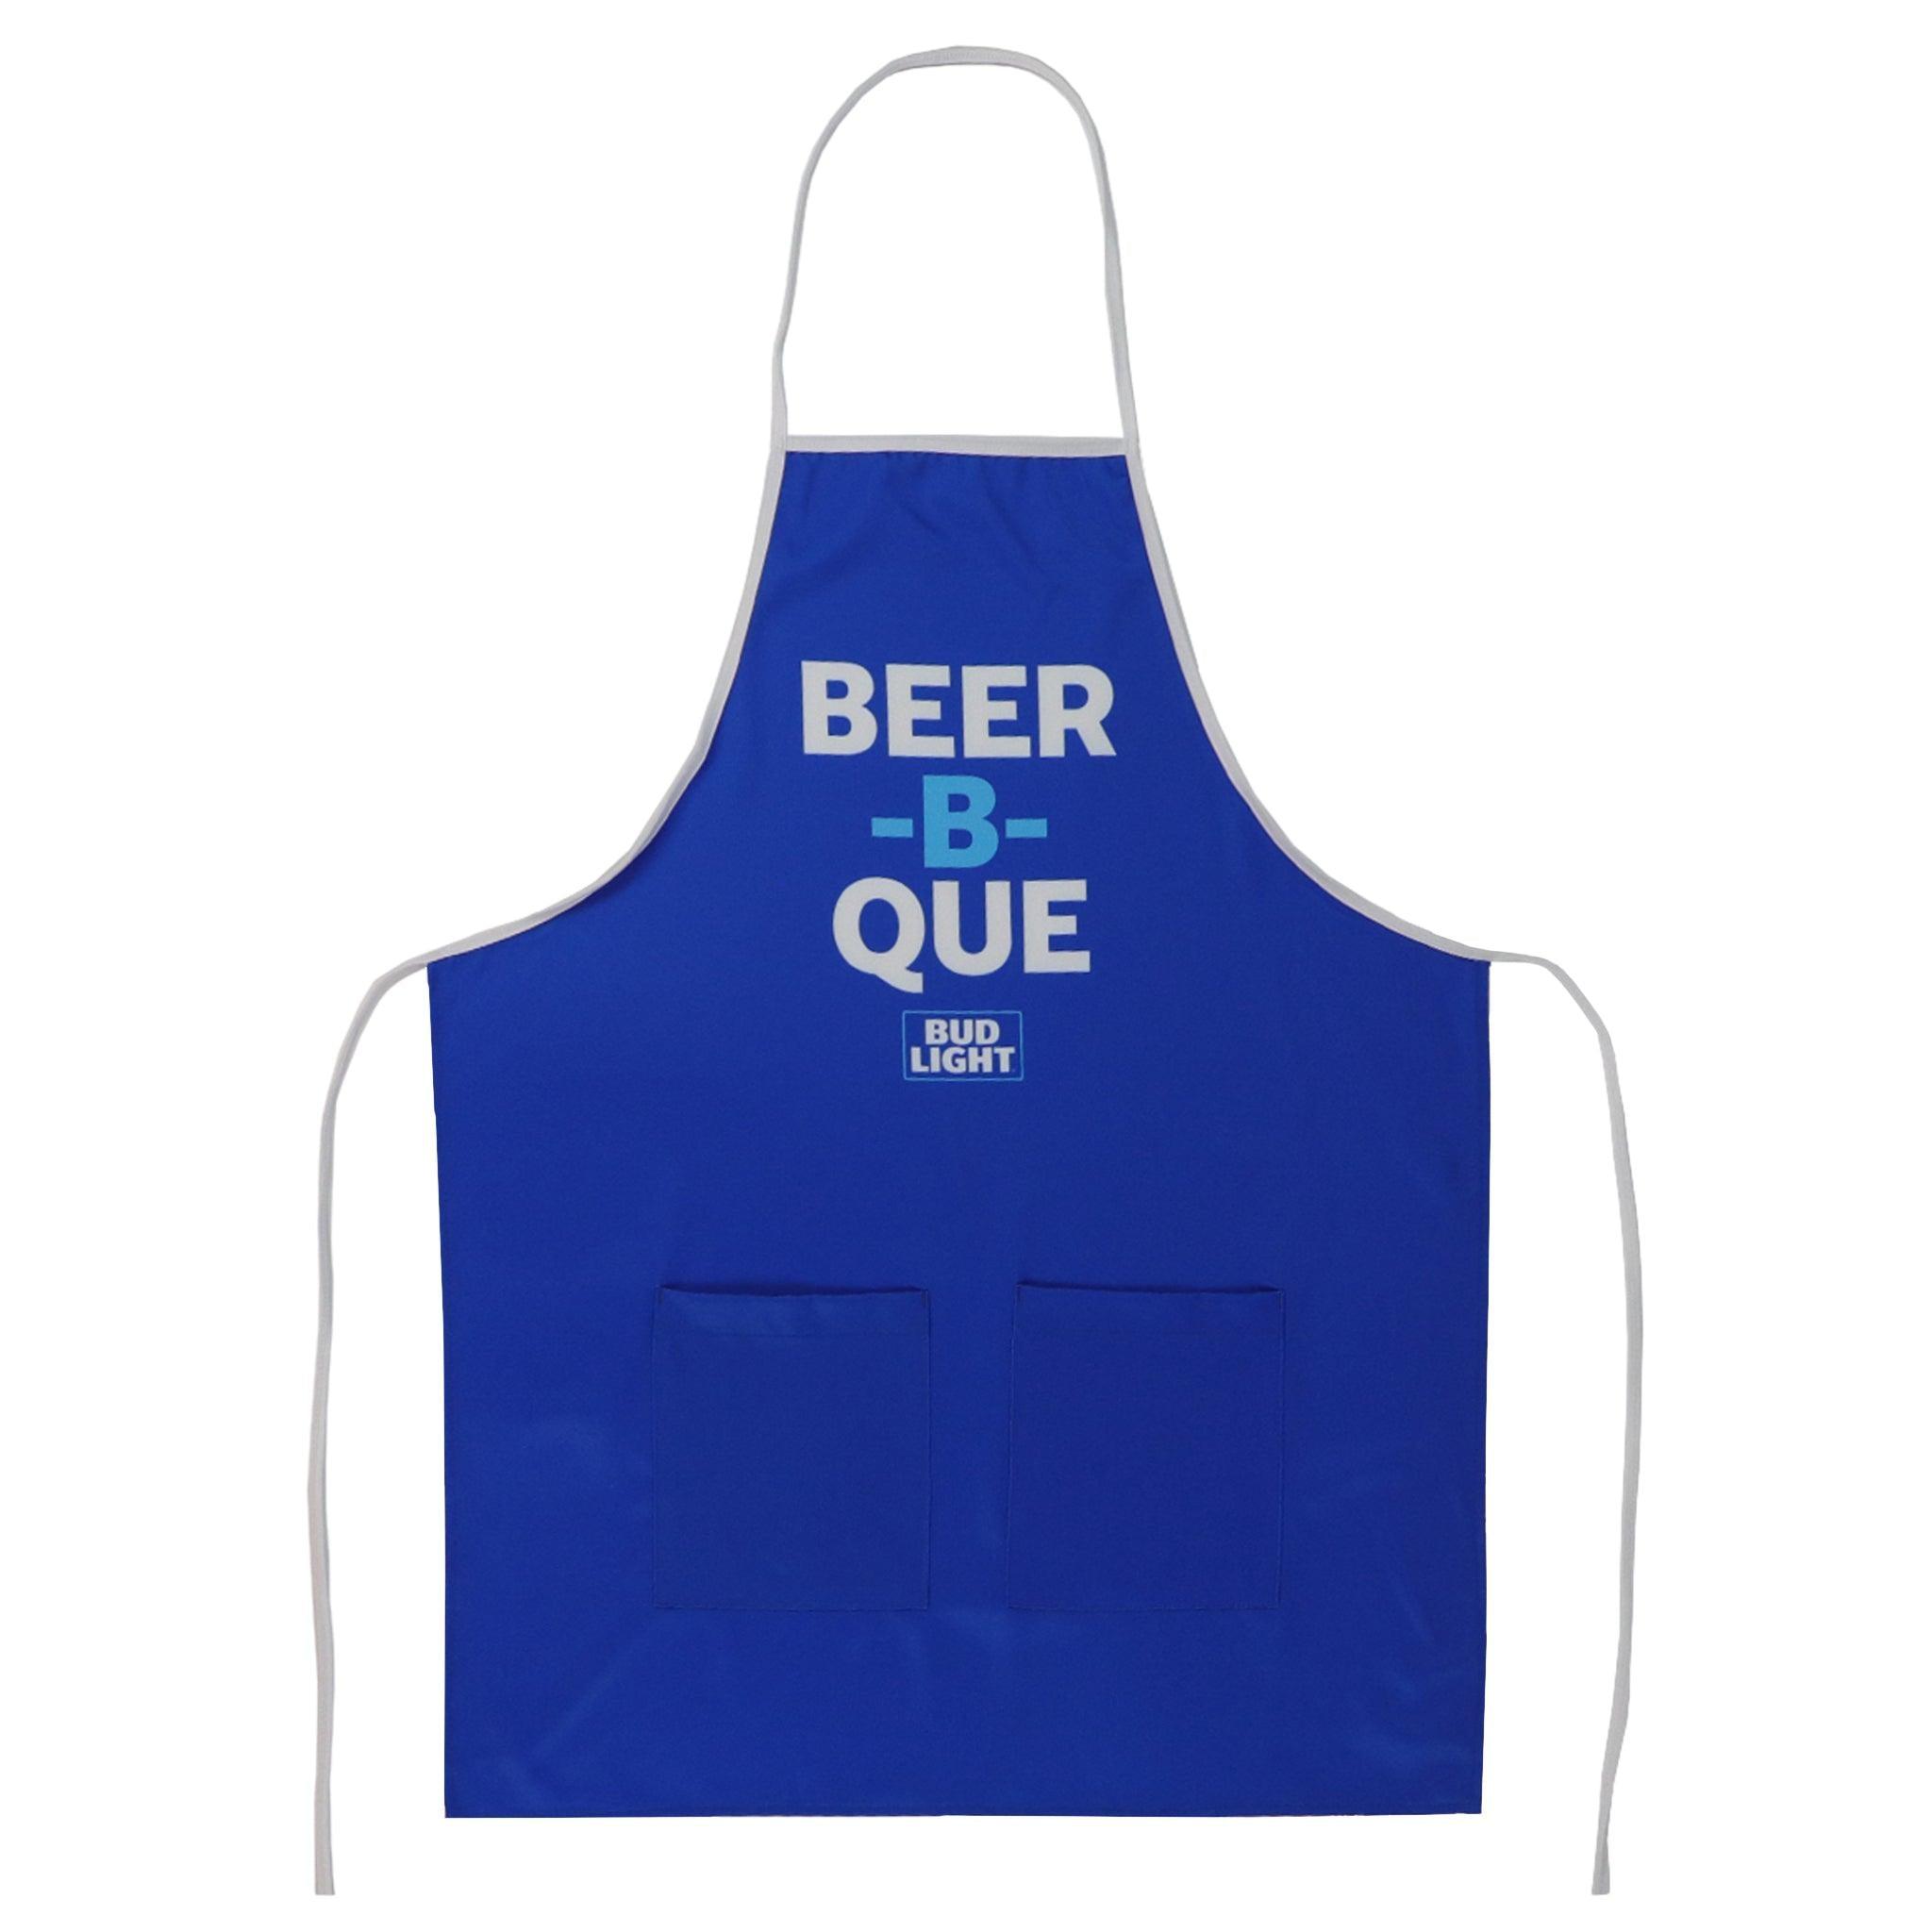 Blue apron with two front pockets and Beer-B-Que Bud Light logo on front center chest